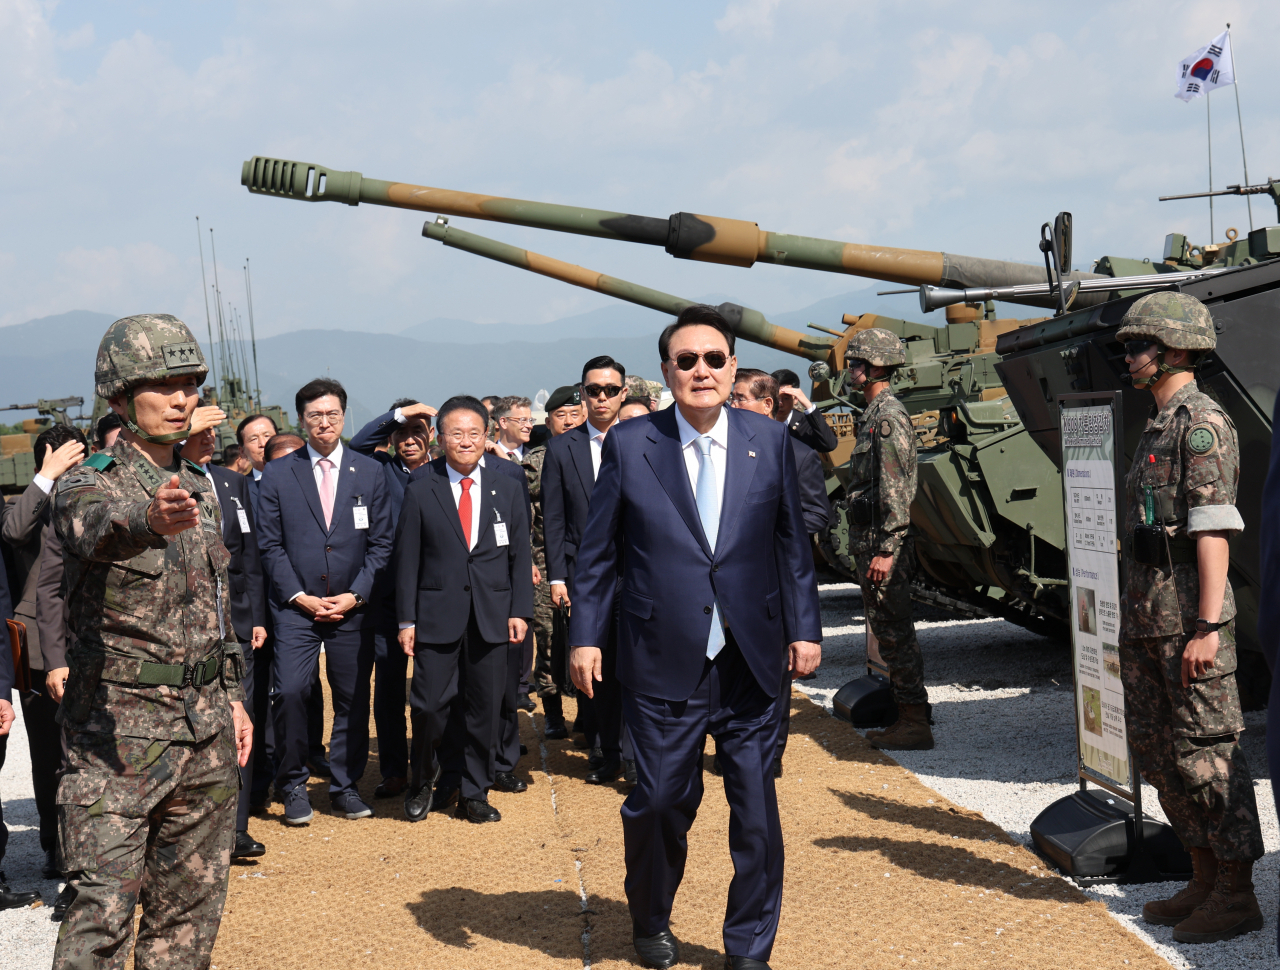 President Yoon Suk Yeol (center) inspects South Korean tanks after live-fire drills with the US at an Army training field in Pocheon, Gyeonggi Province on Thursday. (Yonhap)